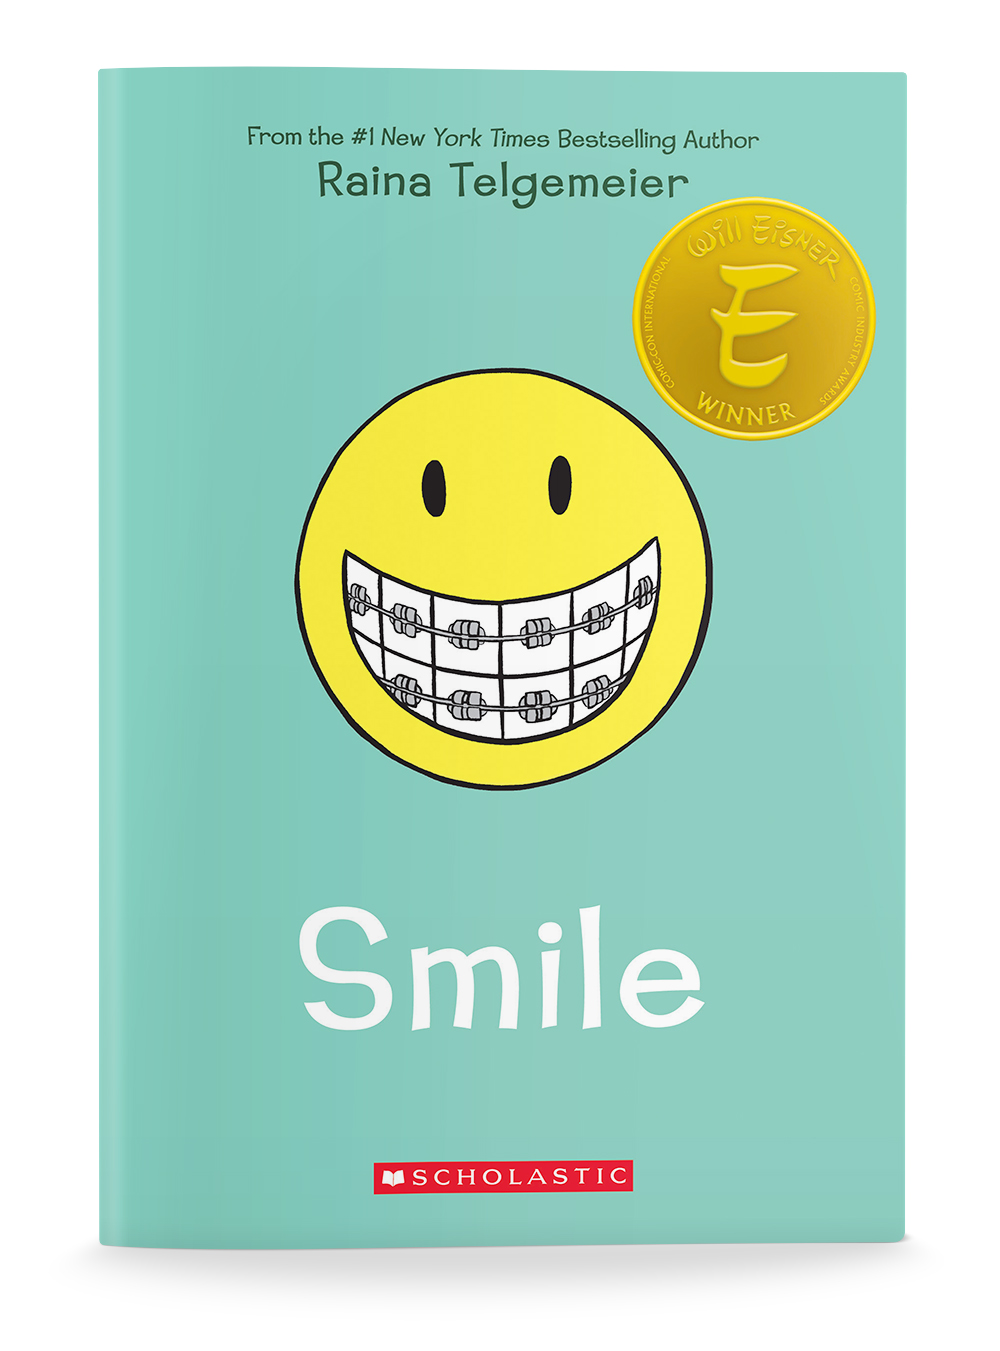 about book a smile